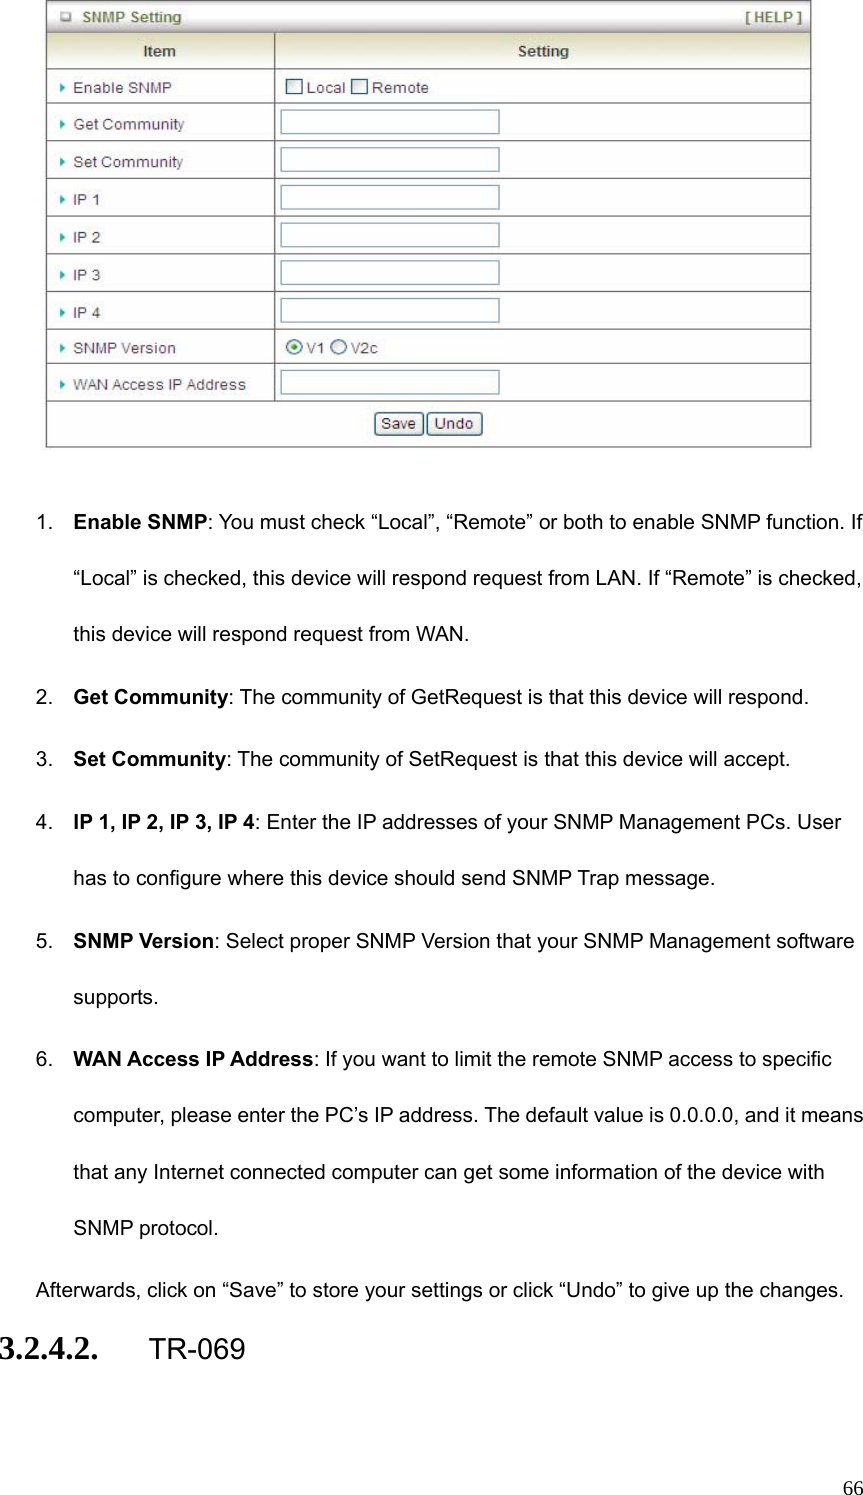  66  1.  Enable SNMP: You must check “Local”, “Remote” or both to enable SNMP function. If “Local” is checked, this device will respond request from LAN. If “Remote” is checked, this device will respond request from WAN. 2.  Get Community: The community of GetRequest is that this device will respond. 3.  Set Community: The community of SetRequest is that this device will accept. 4.  IP 1, IP 2, IP 3, IP 4: Enter the IP addresses of your SNMP Management PCs. User has to configure where this device should send SNMP Trap message. 5.  SNMP Version: Select proper SNMP Version that your SNMP Management software supports. 6.  WAN Access IP Address: If you want to limit the remote SNMP access to specific computer, please enter the PC’s IP address. The default value is 0.0.0.0, and it means that any Internet connected computer can get some information of the device with SNMP protocol. Afterwards, click on “Save” to store your settings or click “Undo” to give up the changes. 3.2.4.2. TR-069 